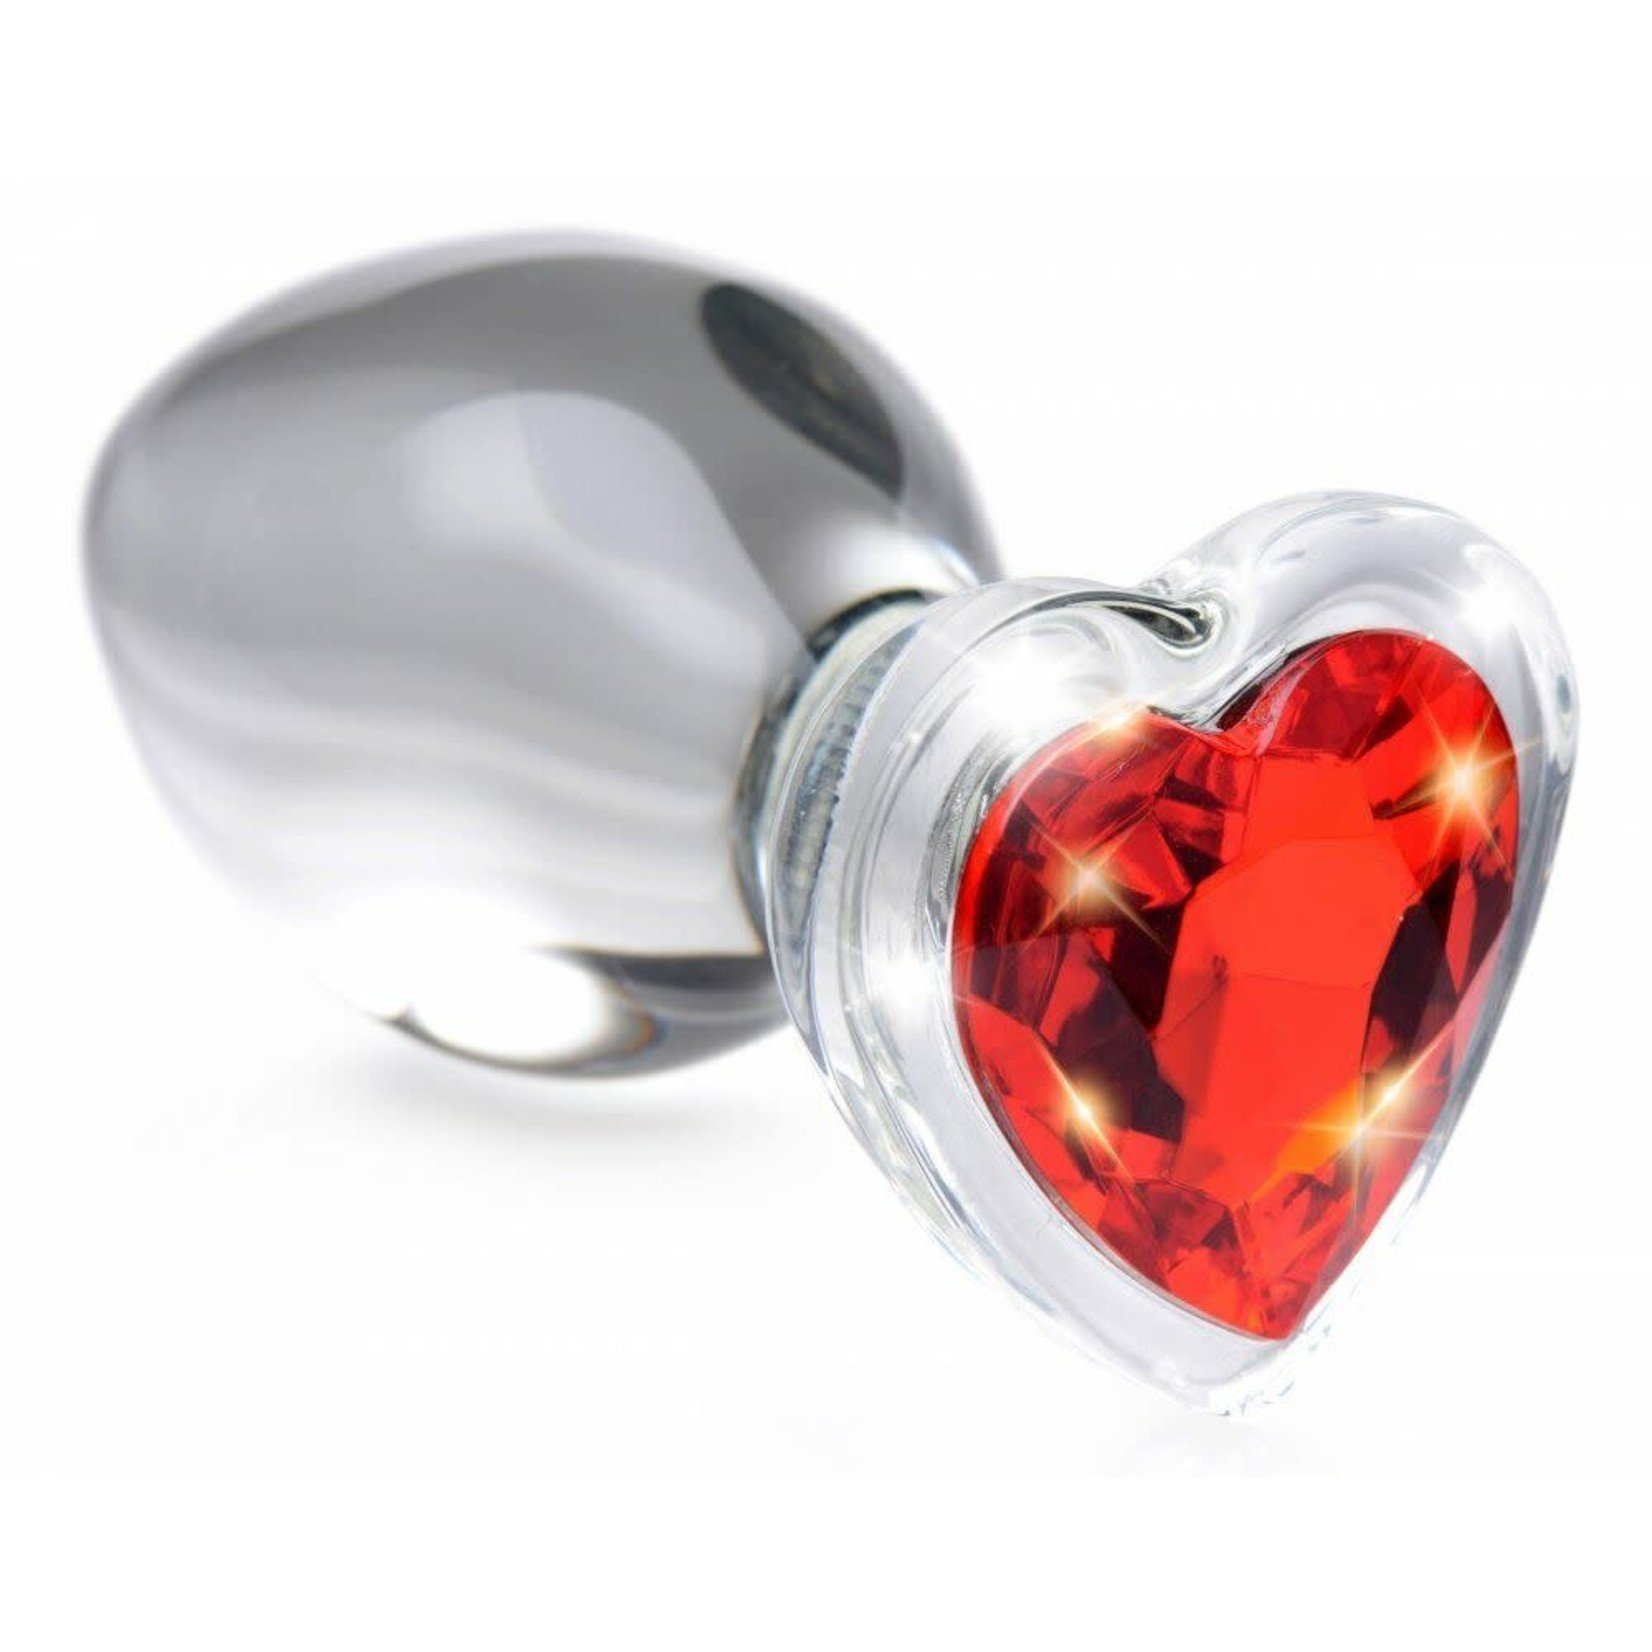 XR BRANDS BOOTY SPARKS - RED HEART GEM GLASS ANAL PLUG - LARGE